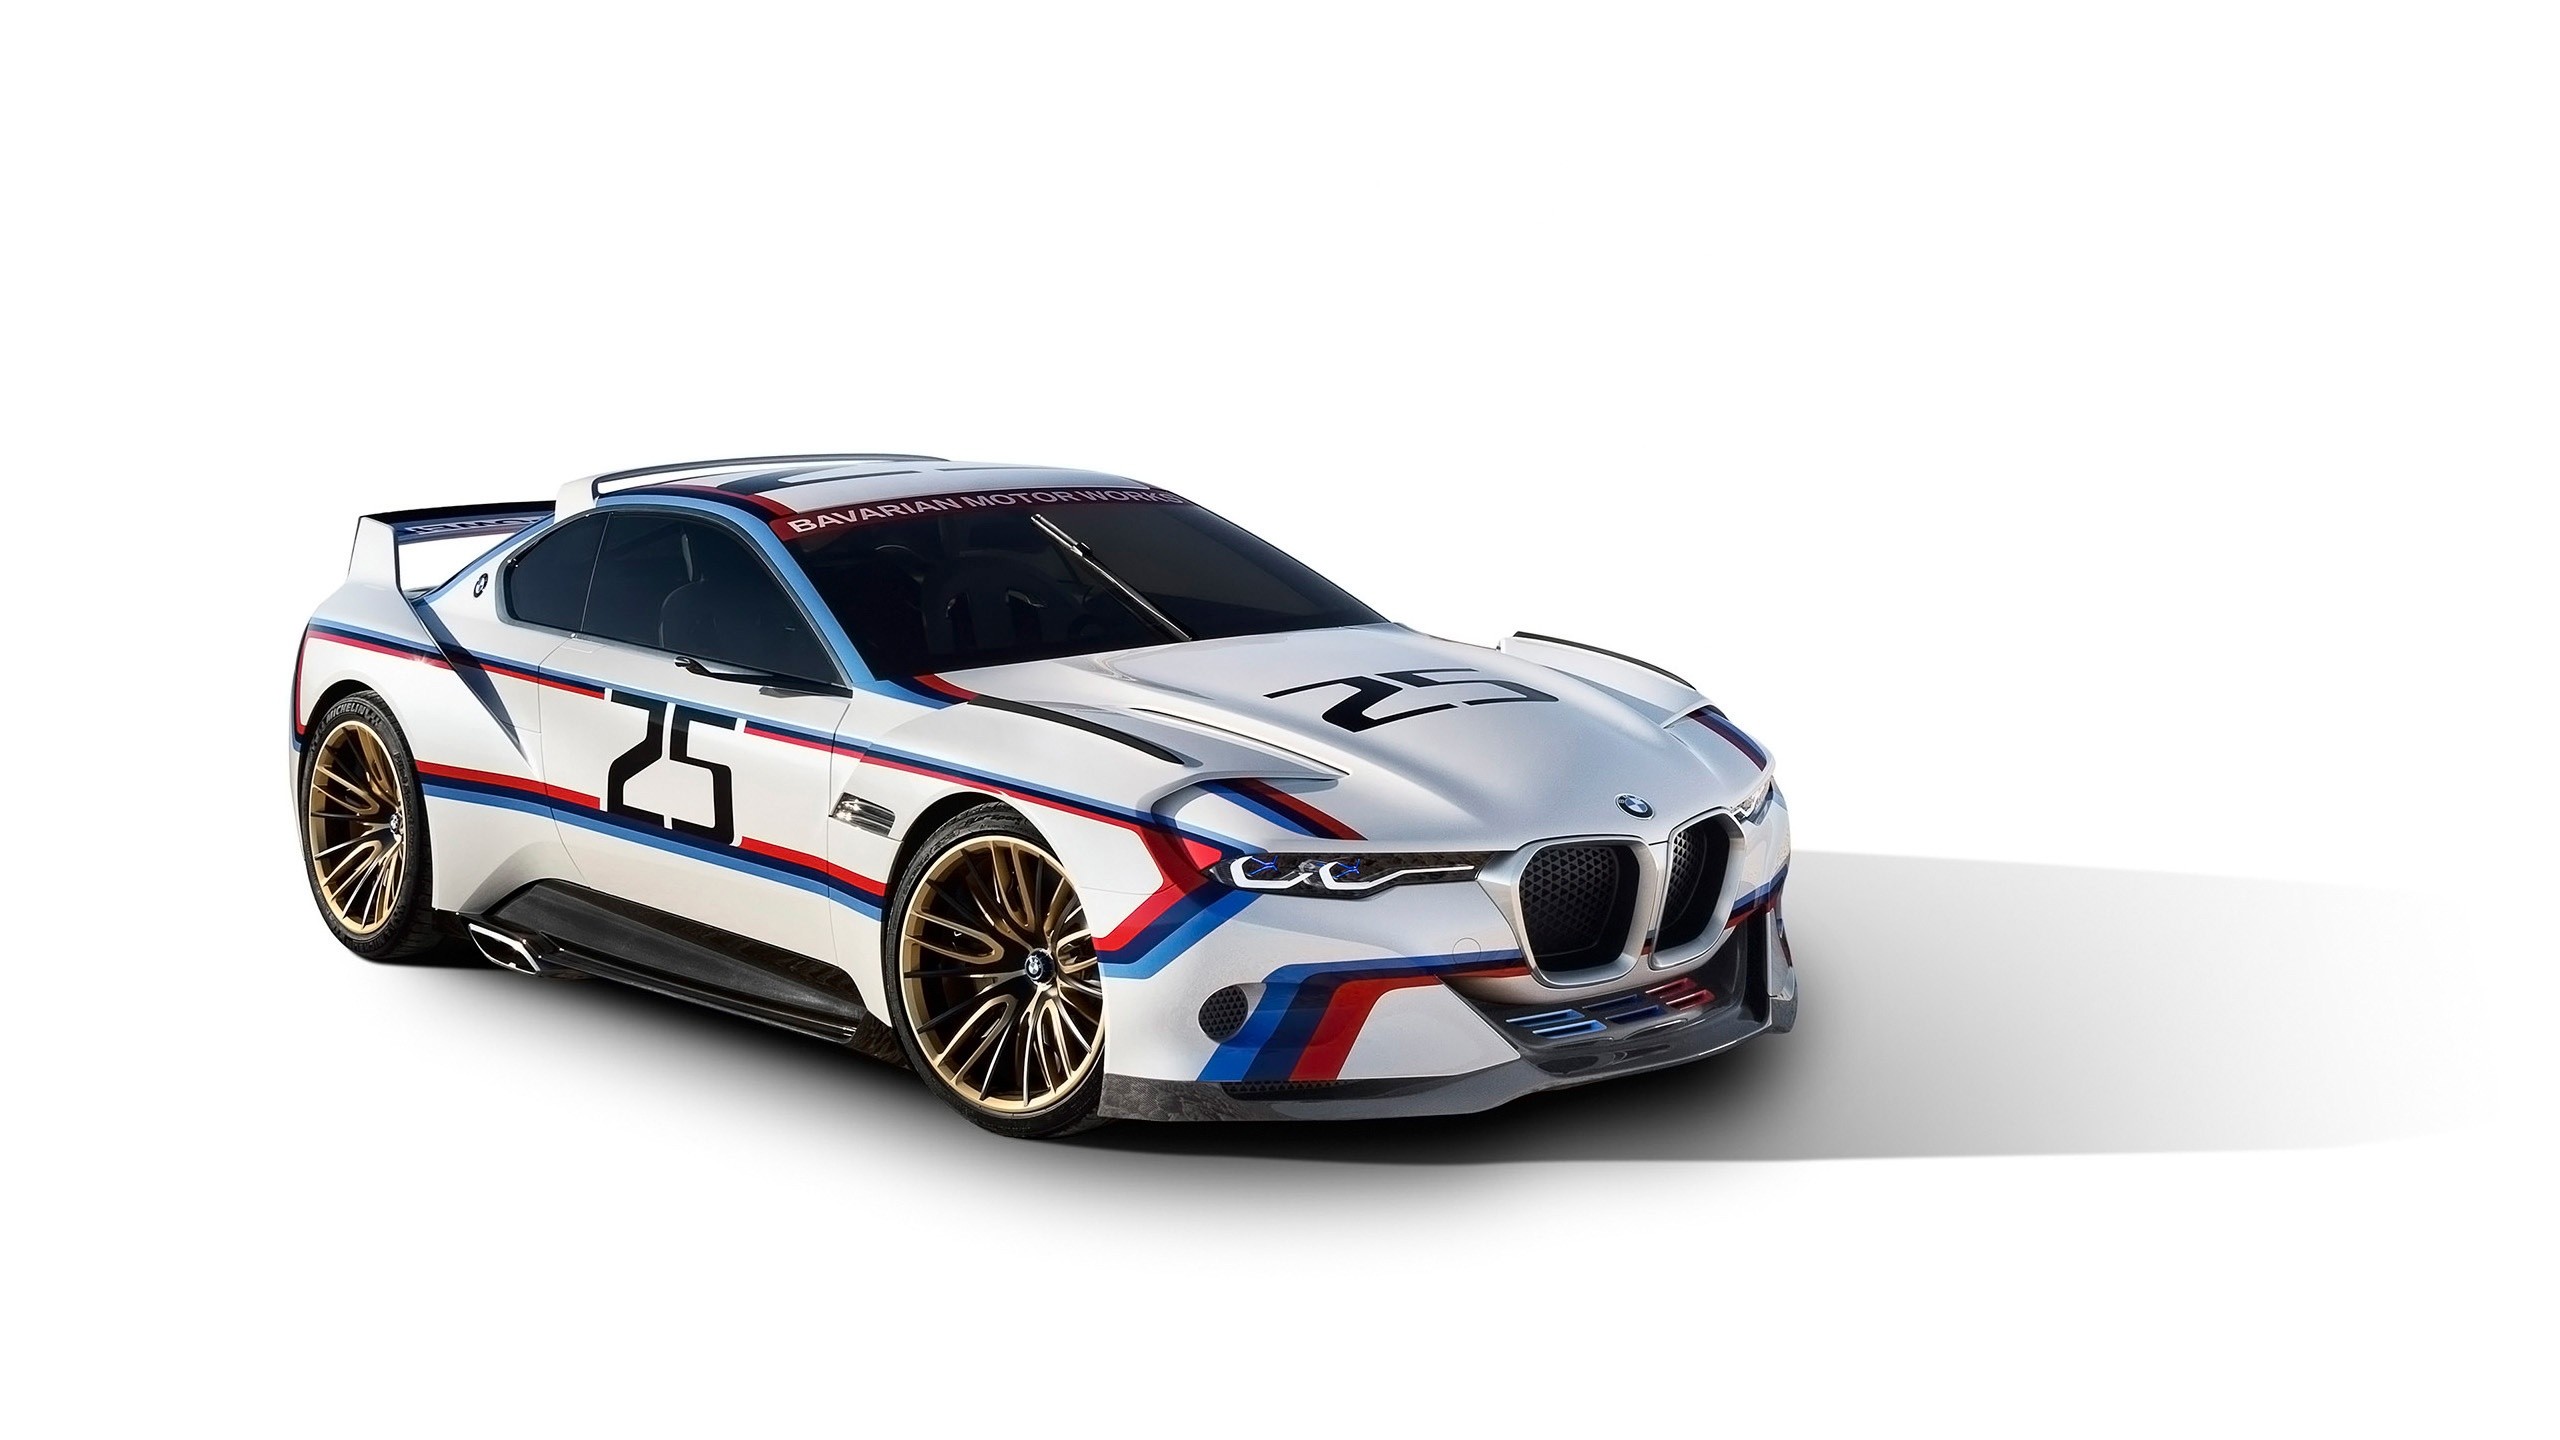 General 2560x1440 car BMW vehicle white cars white background simple background numbers BMW 3.0 CSL HOMMAGE race cars